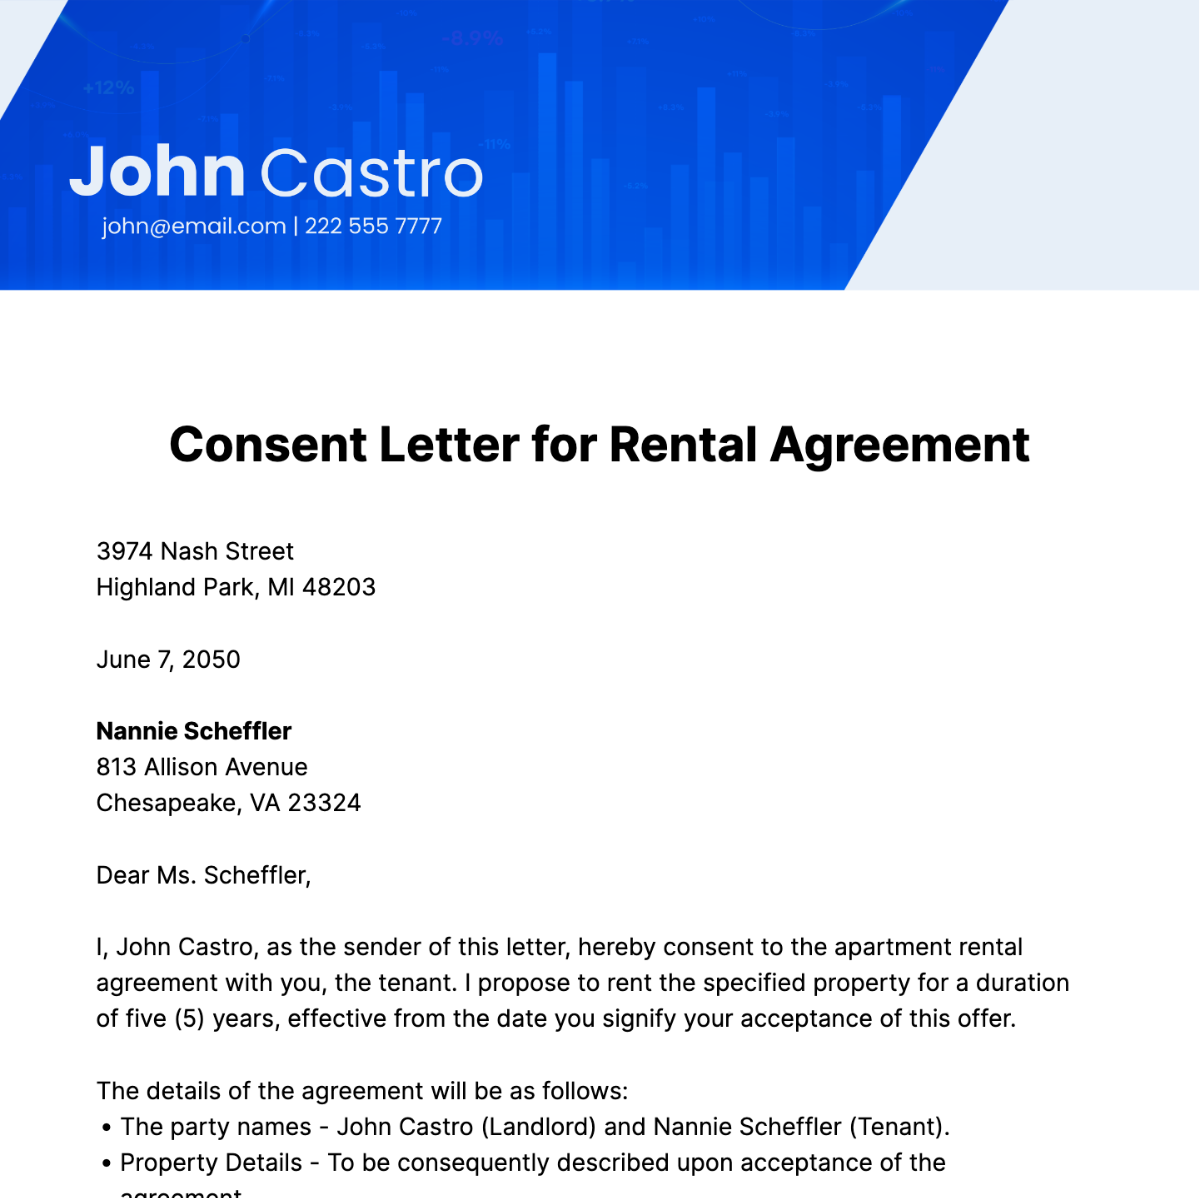 Free Consent Letter for Rental Agreement Template